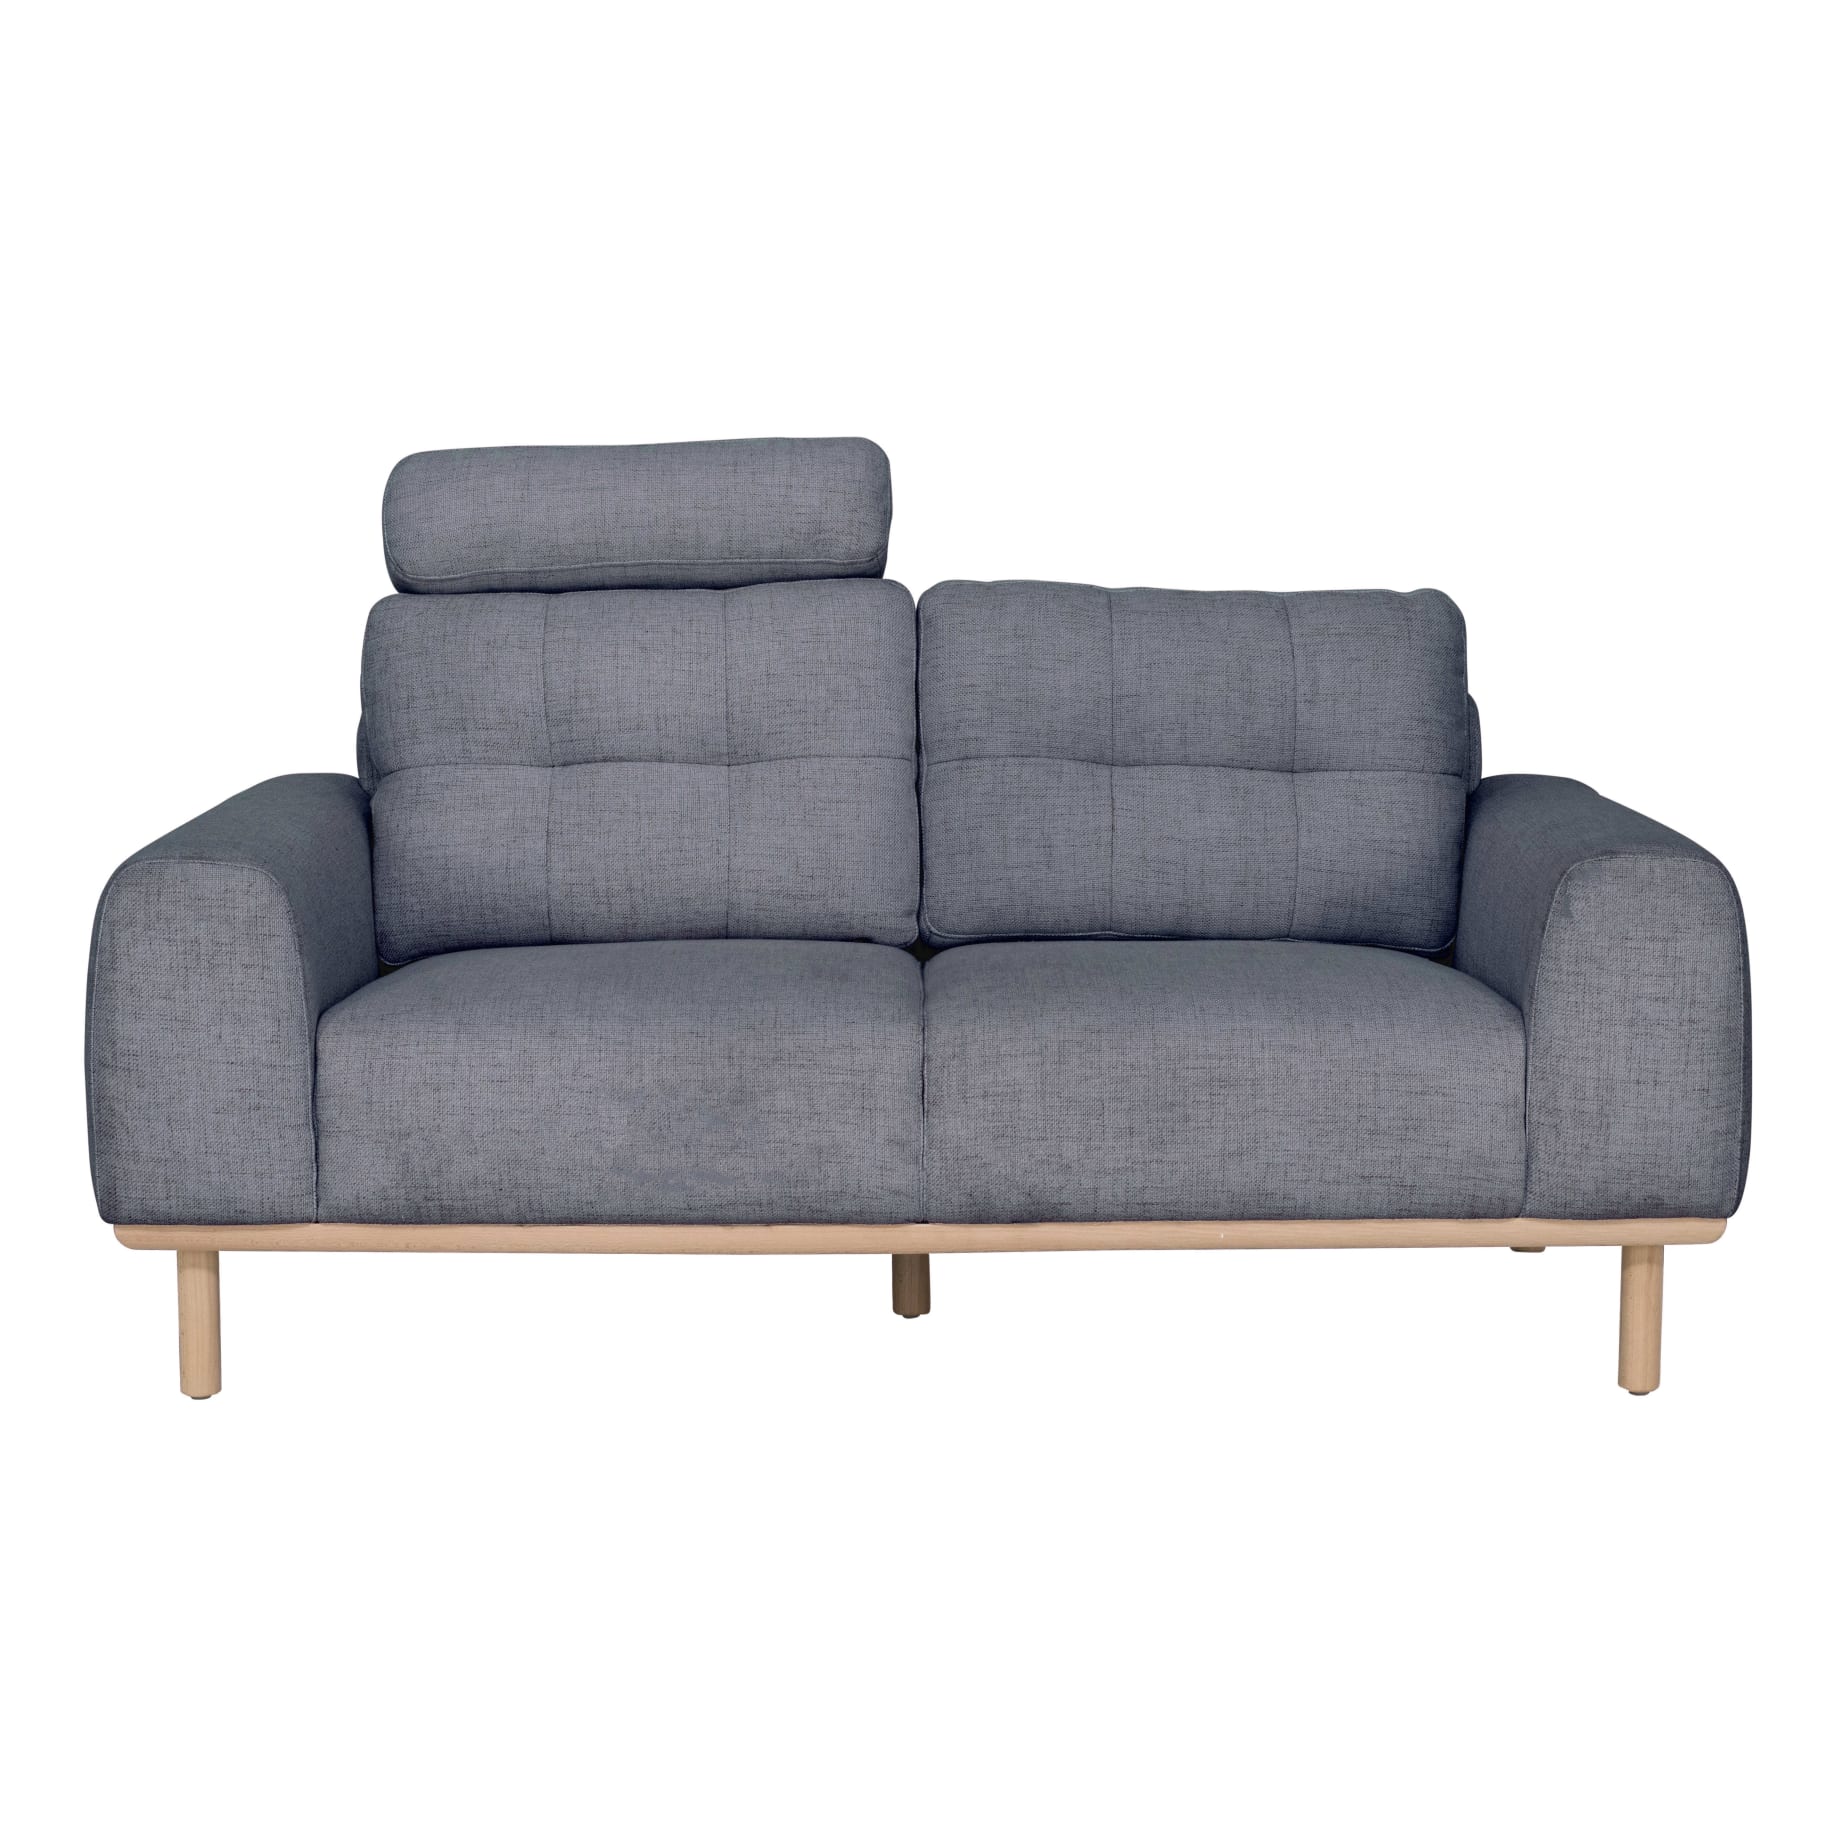 Stratton 2.5 Seater Sofa in Cloud Pewter